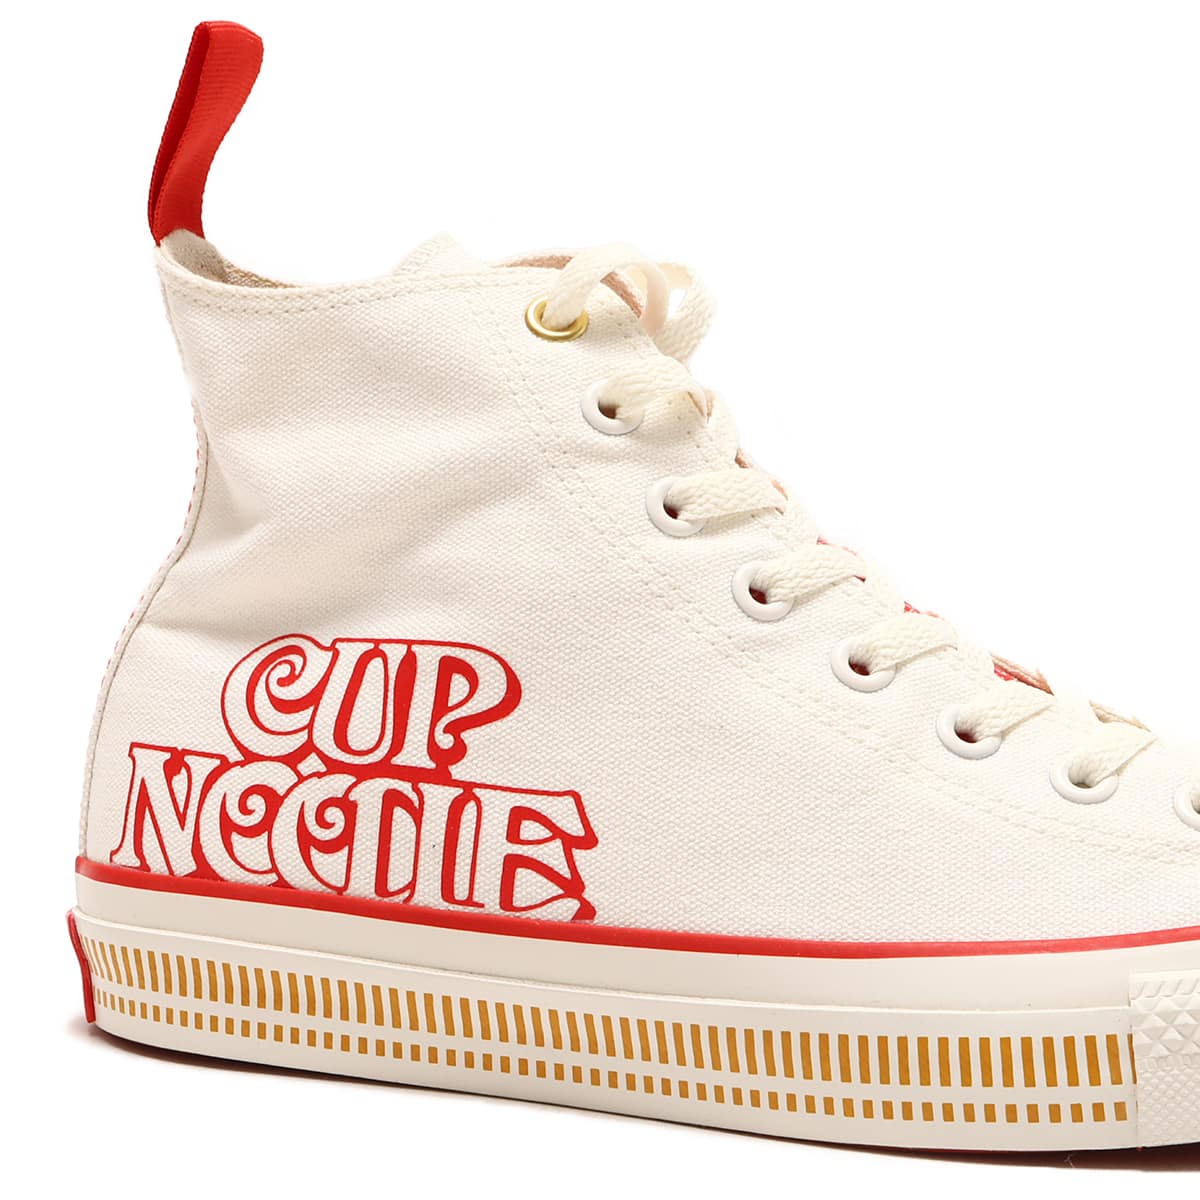 CONVERSE ALL STAR (R) CUPNOODLE HI RED 23SS-I